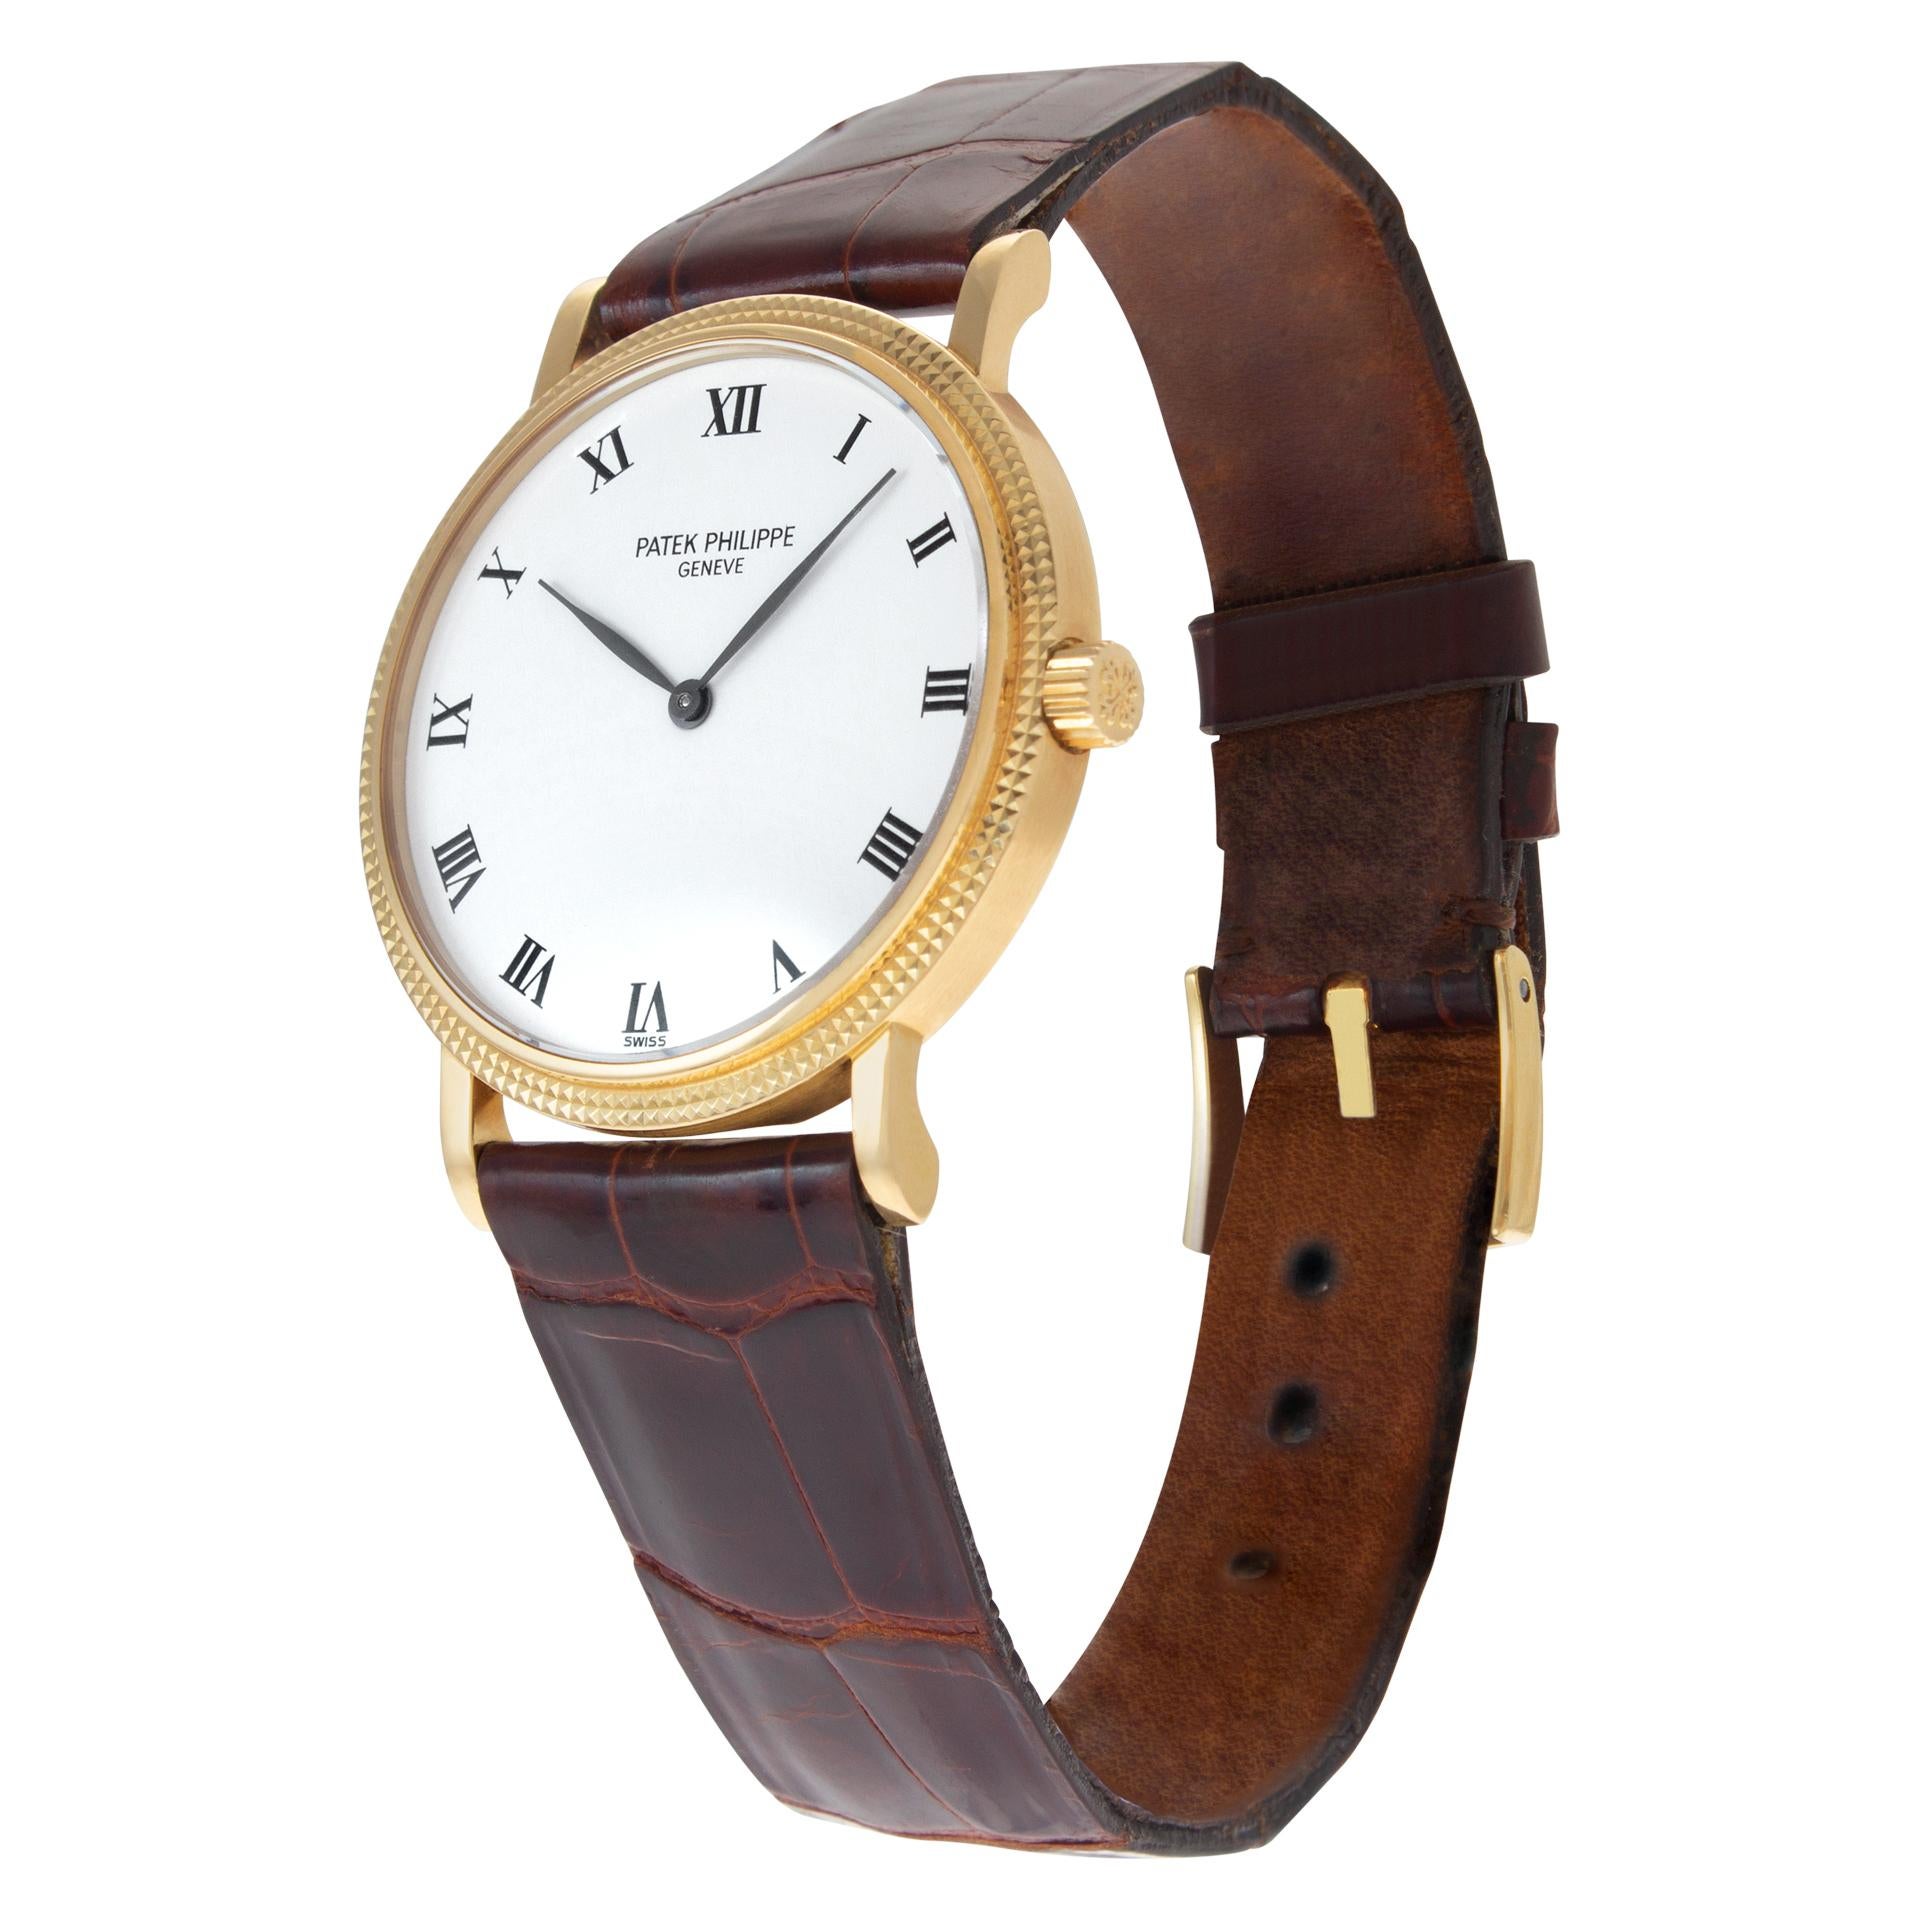 Patek Philippe Calatrava in 18k with hobnail bezel on original brown crocodile strap with Patek Philippe tang buckle. Auto. 33 mm case size. Ref 3992. Circa 1990s. Fine Pre-owned Patek Philippe Watch.

Certified preowned Dress Patek Philippe